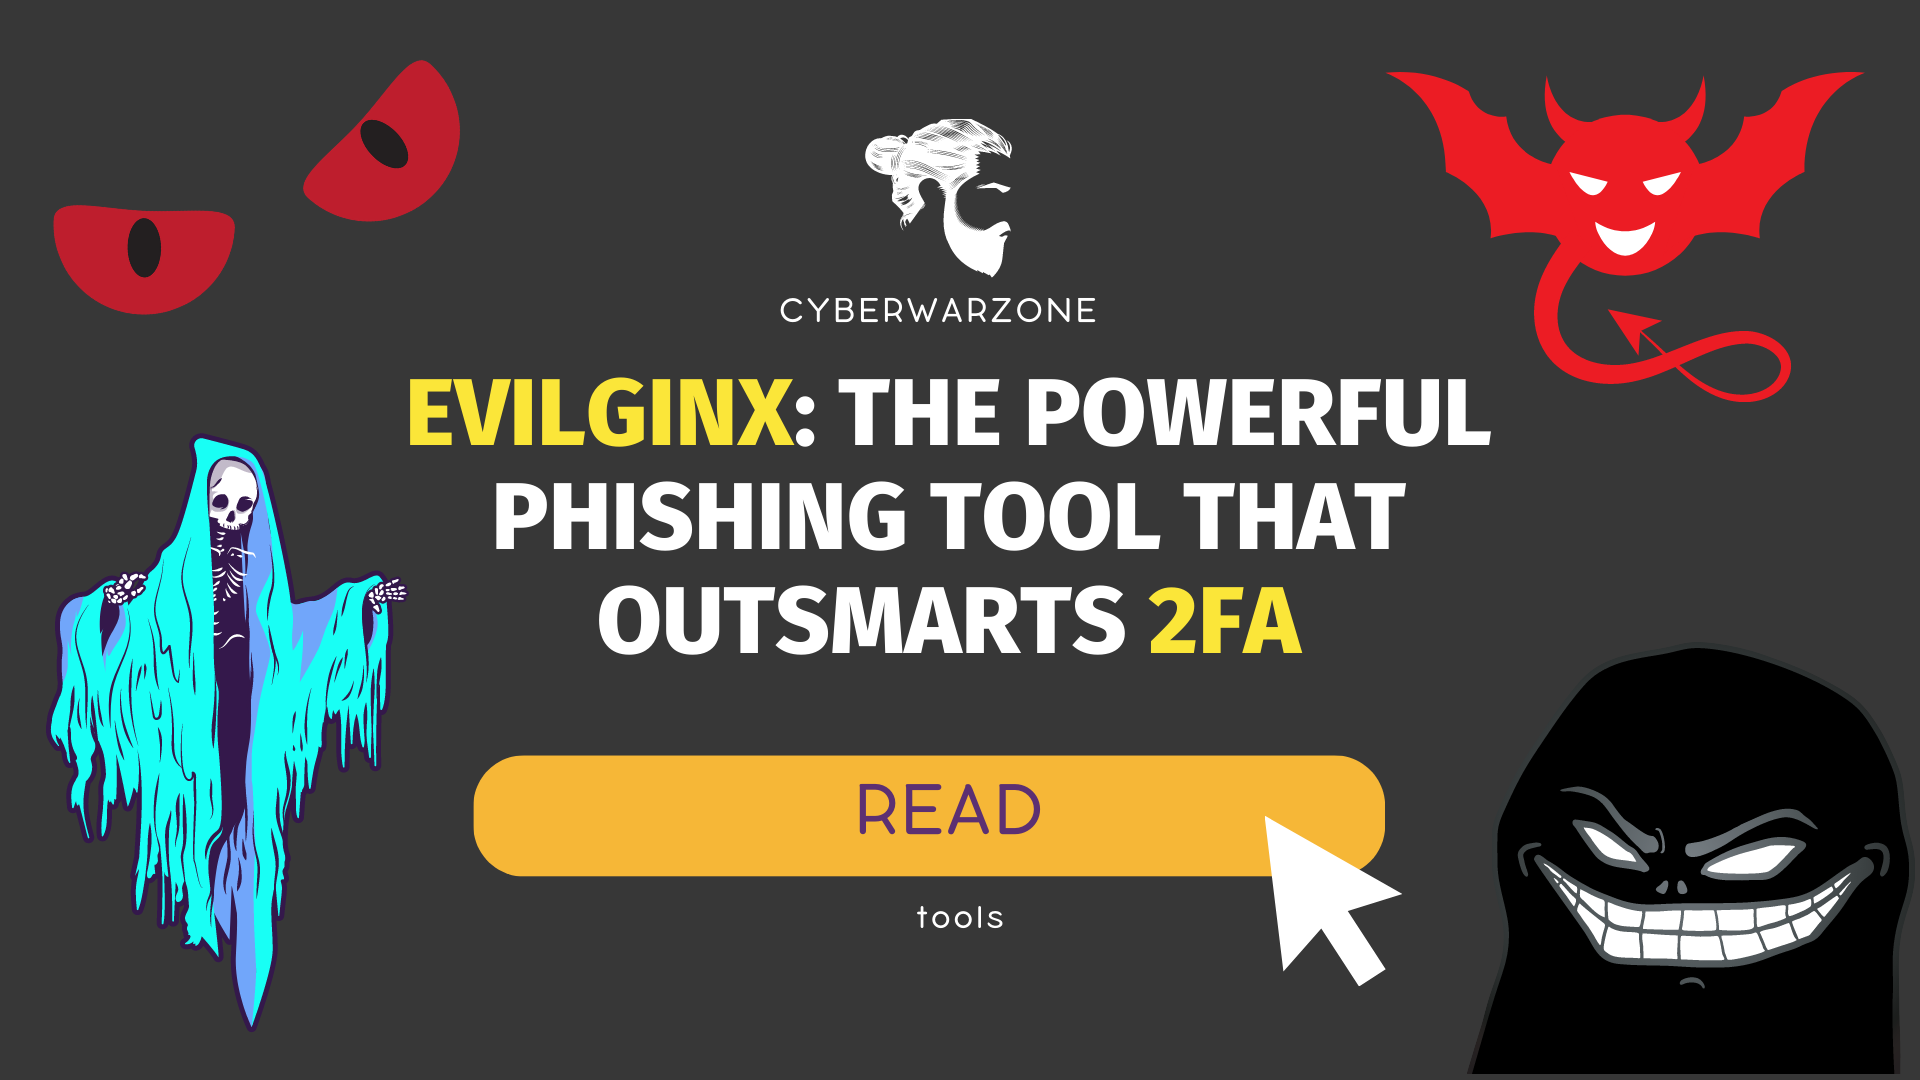 Evilginx: The Powerful Phishing Tool that Outsmarts 2FA